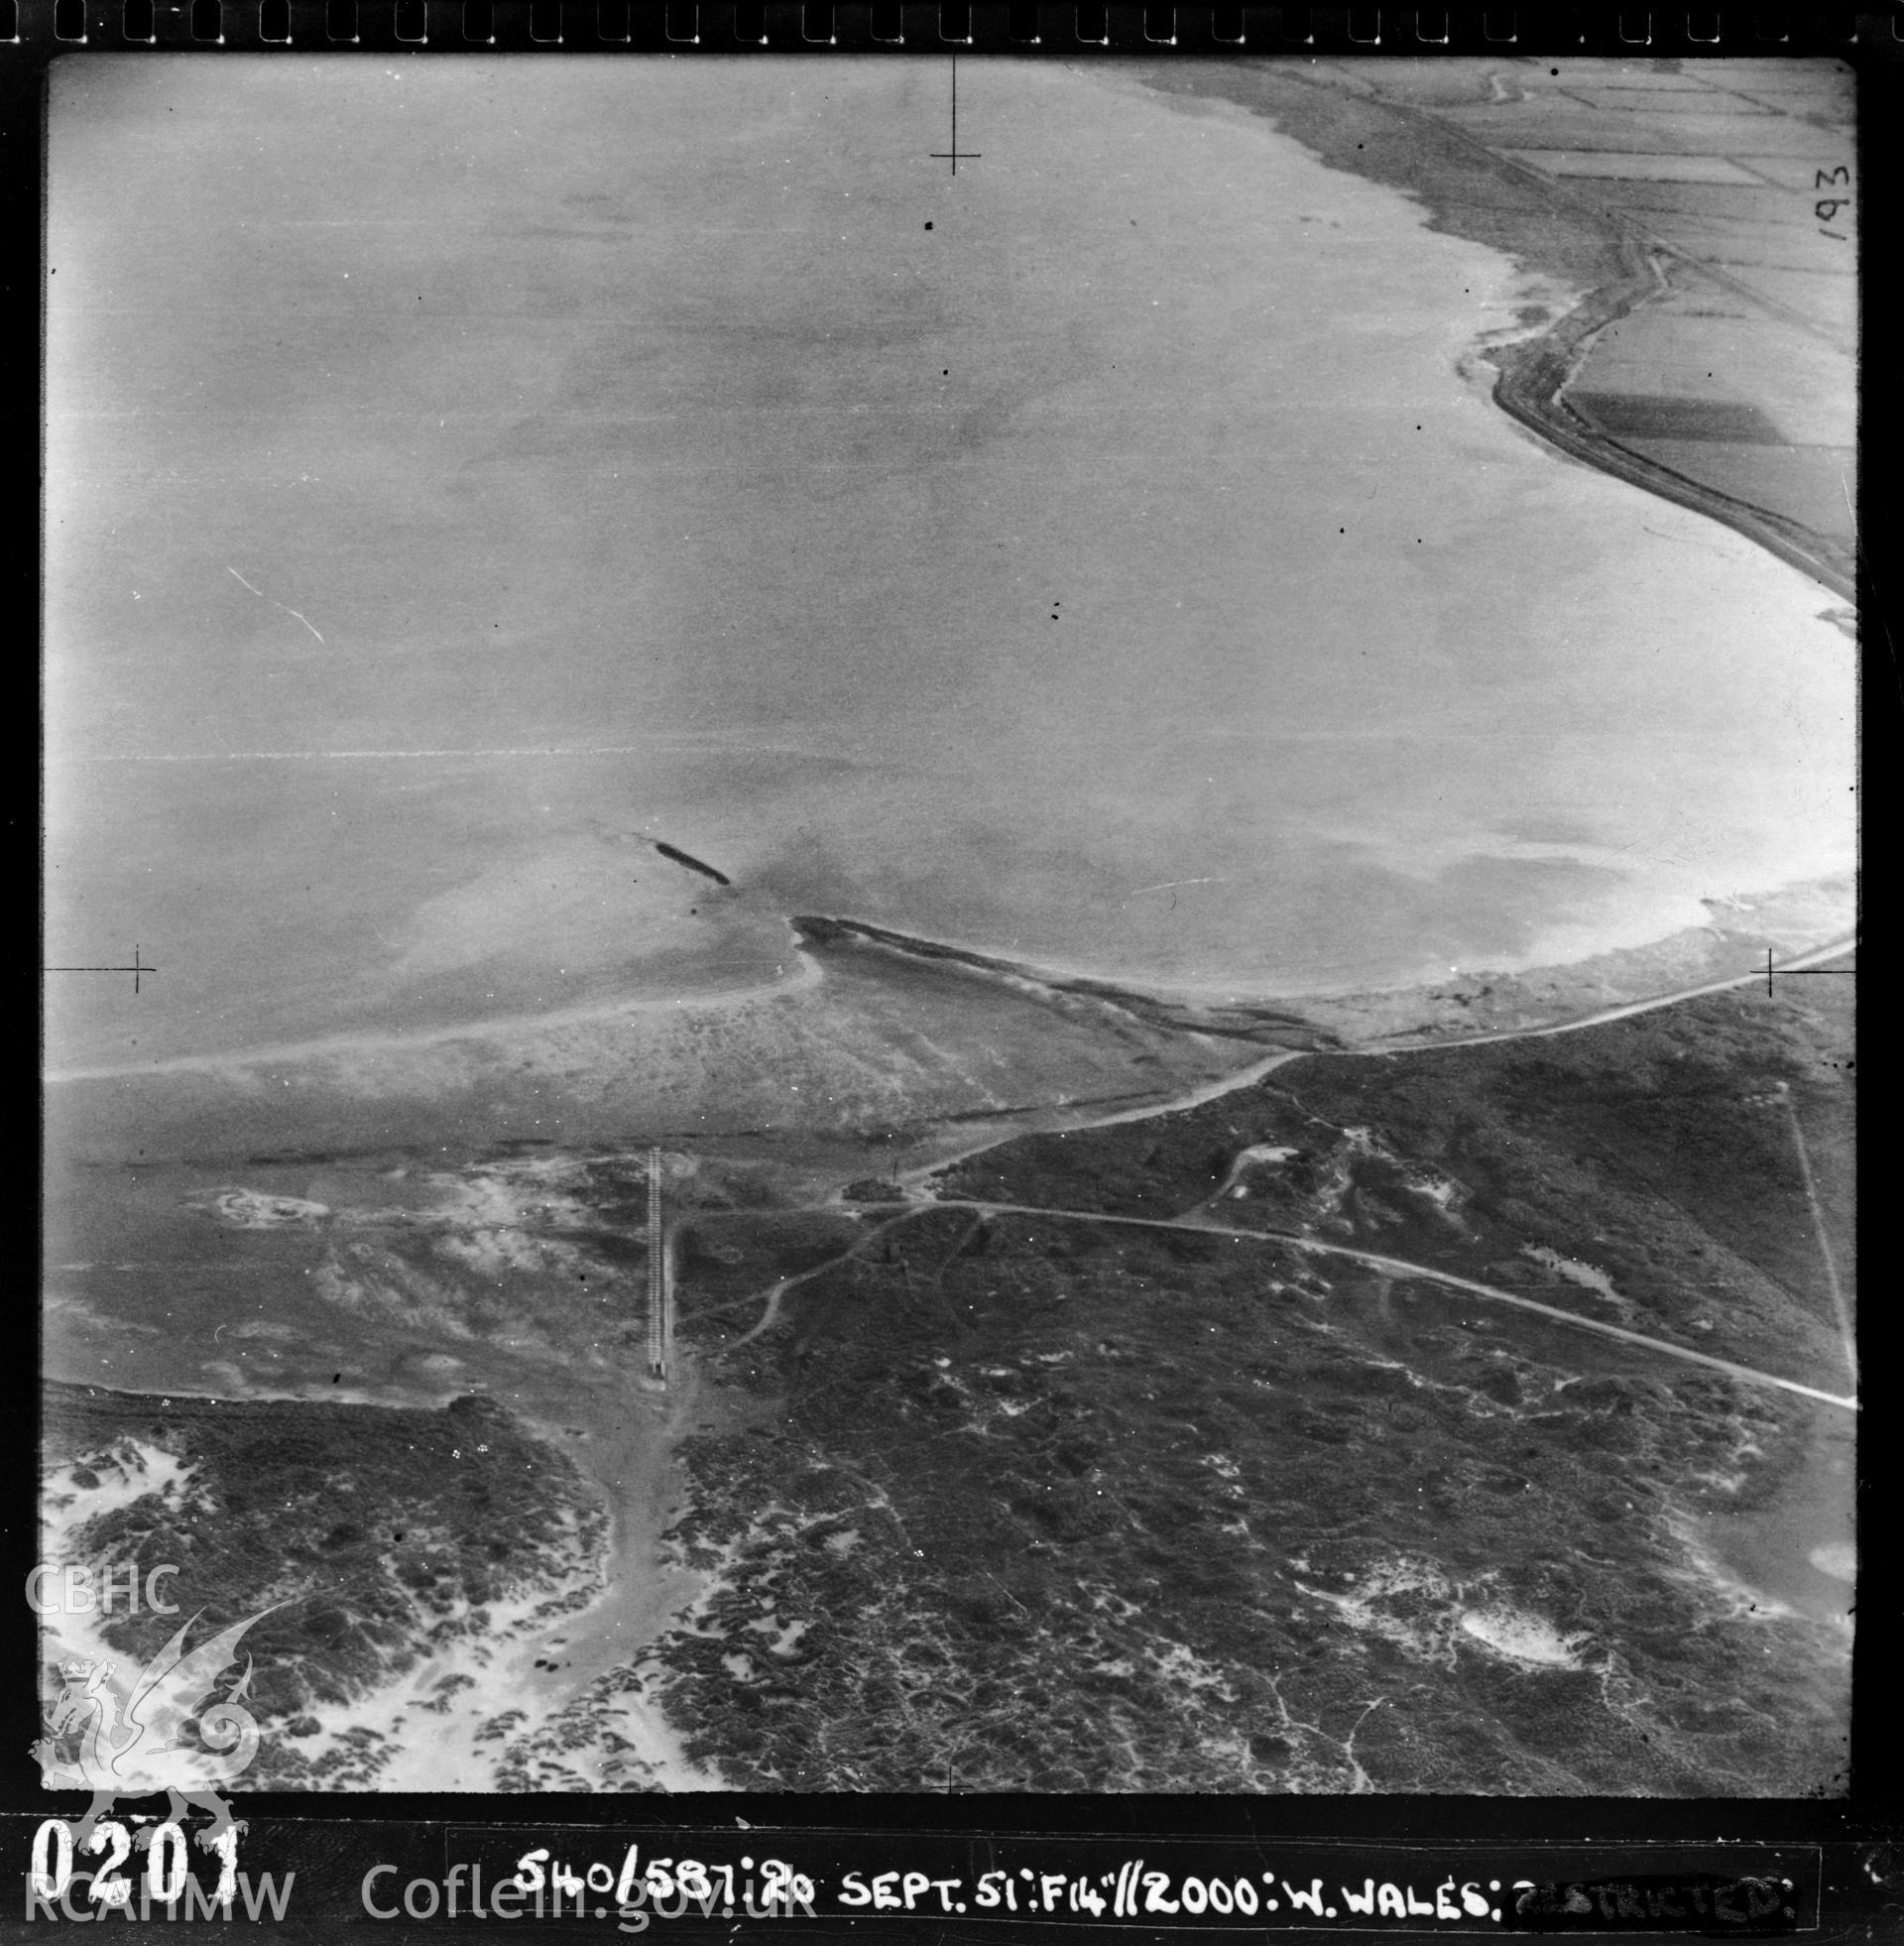 Black and white vertical aerial photograph od the Ynyslas area taken by the RAF on 20/09/1951.